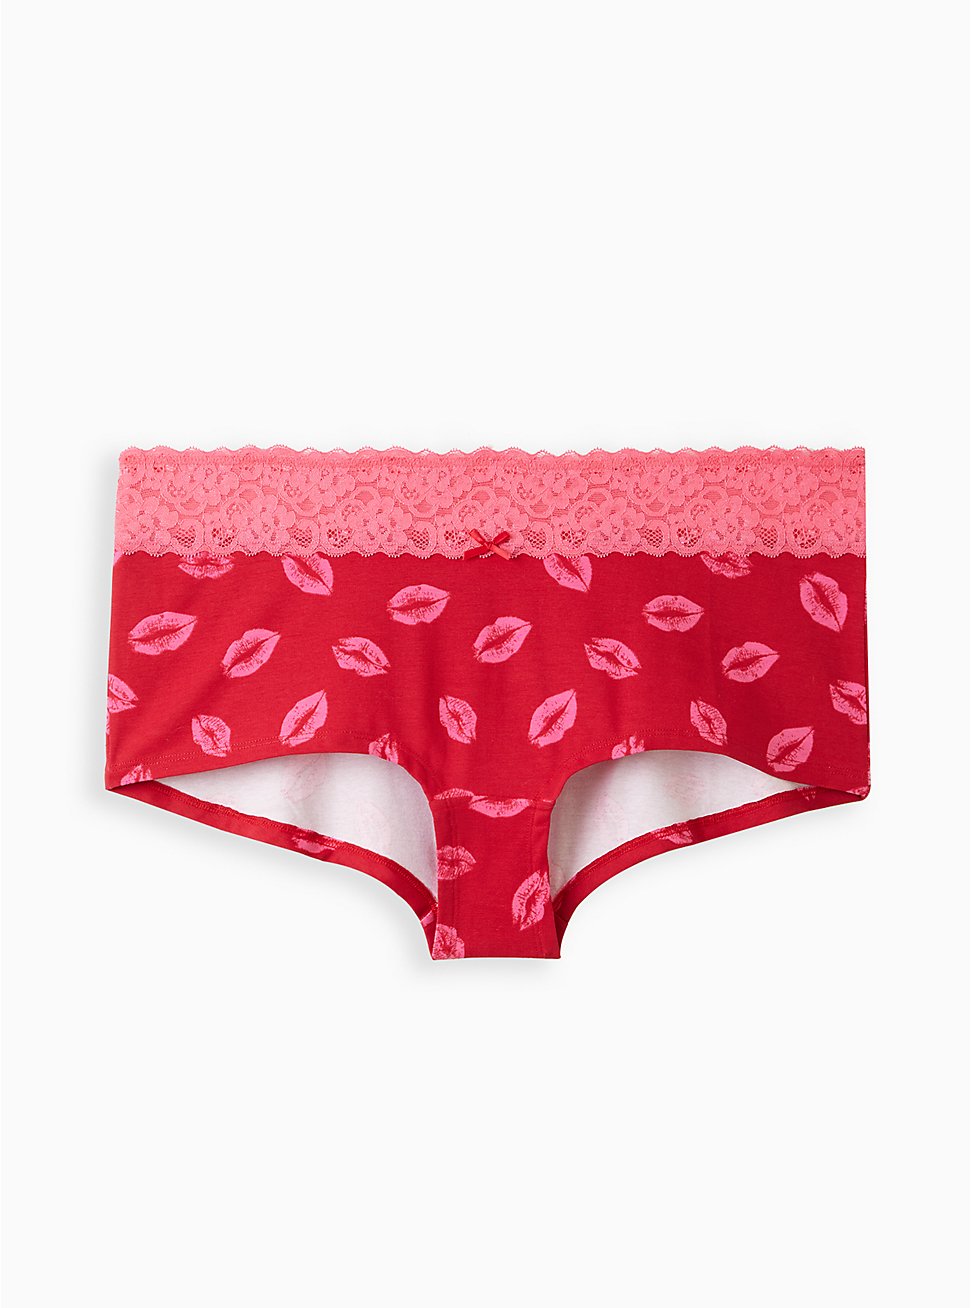 Plus Size Wide Lace Boyshort Panty - Cotton Lips Red, HOLIDAY LIPS- RED, hi-res